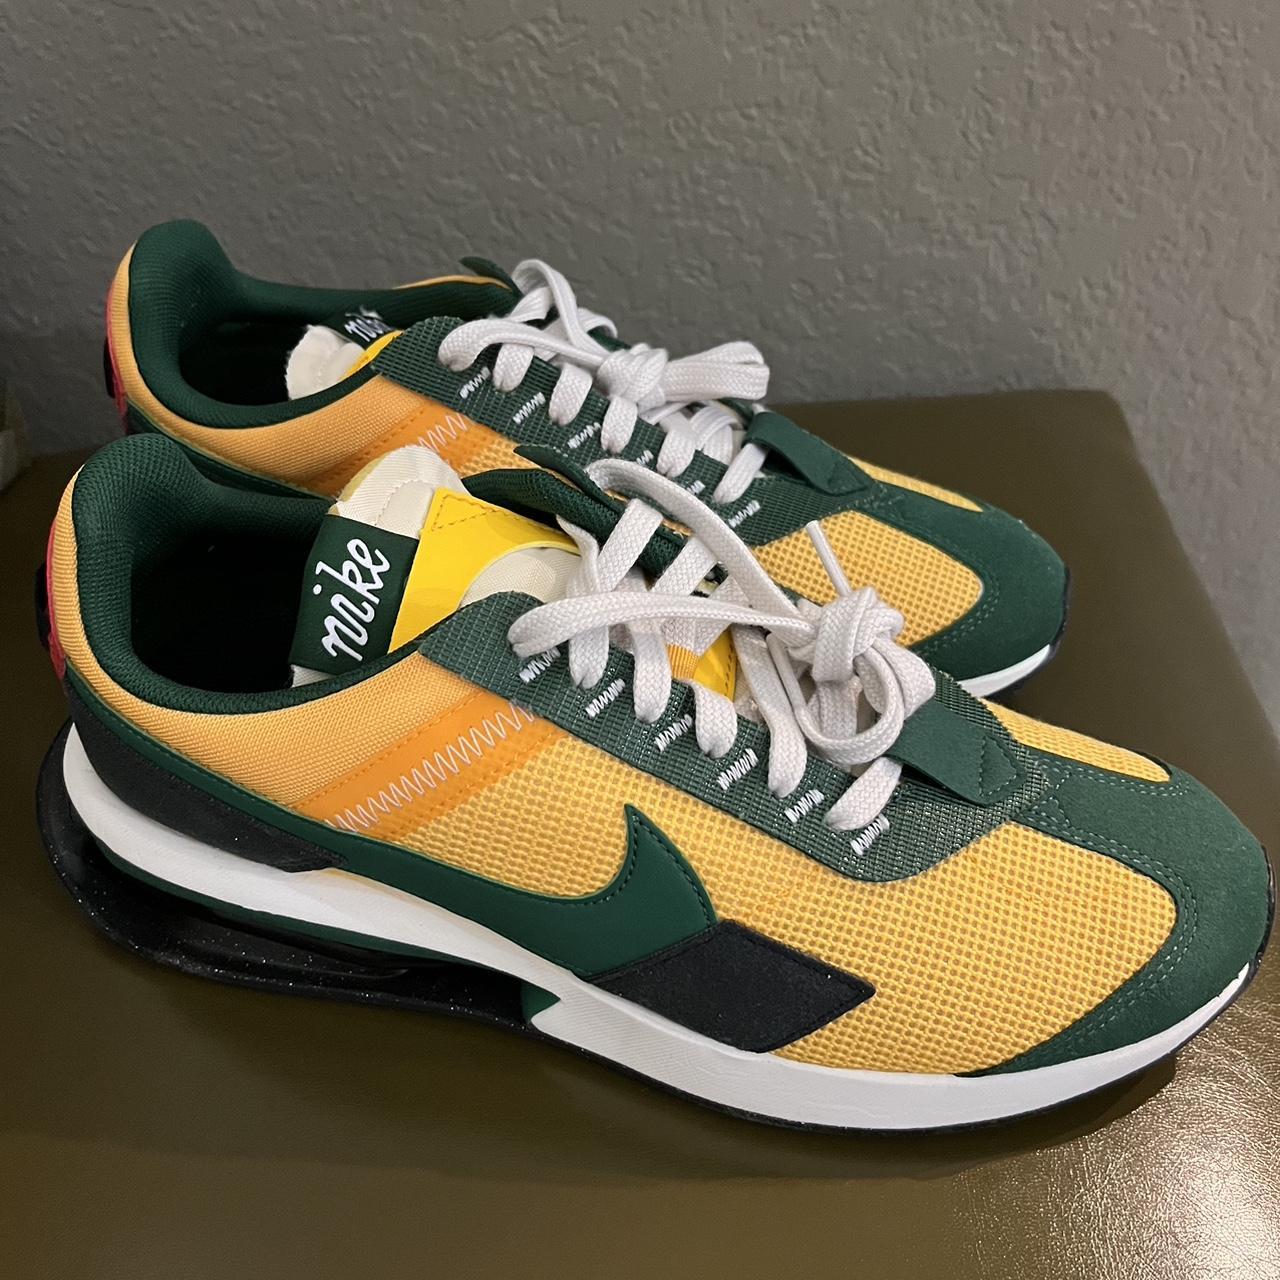 Nike Air Max Pre-Day sneakers in yellow and green